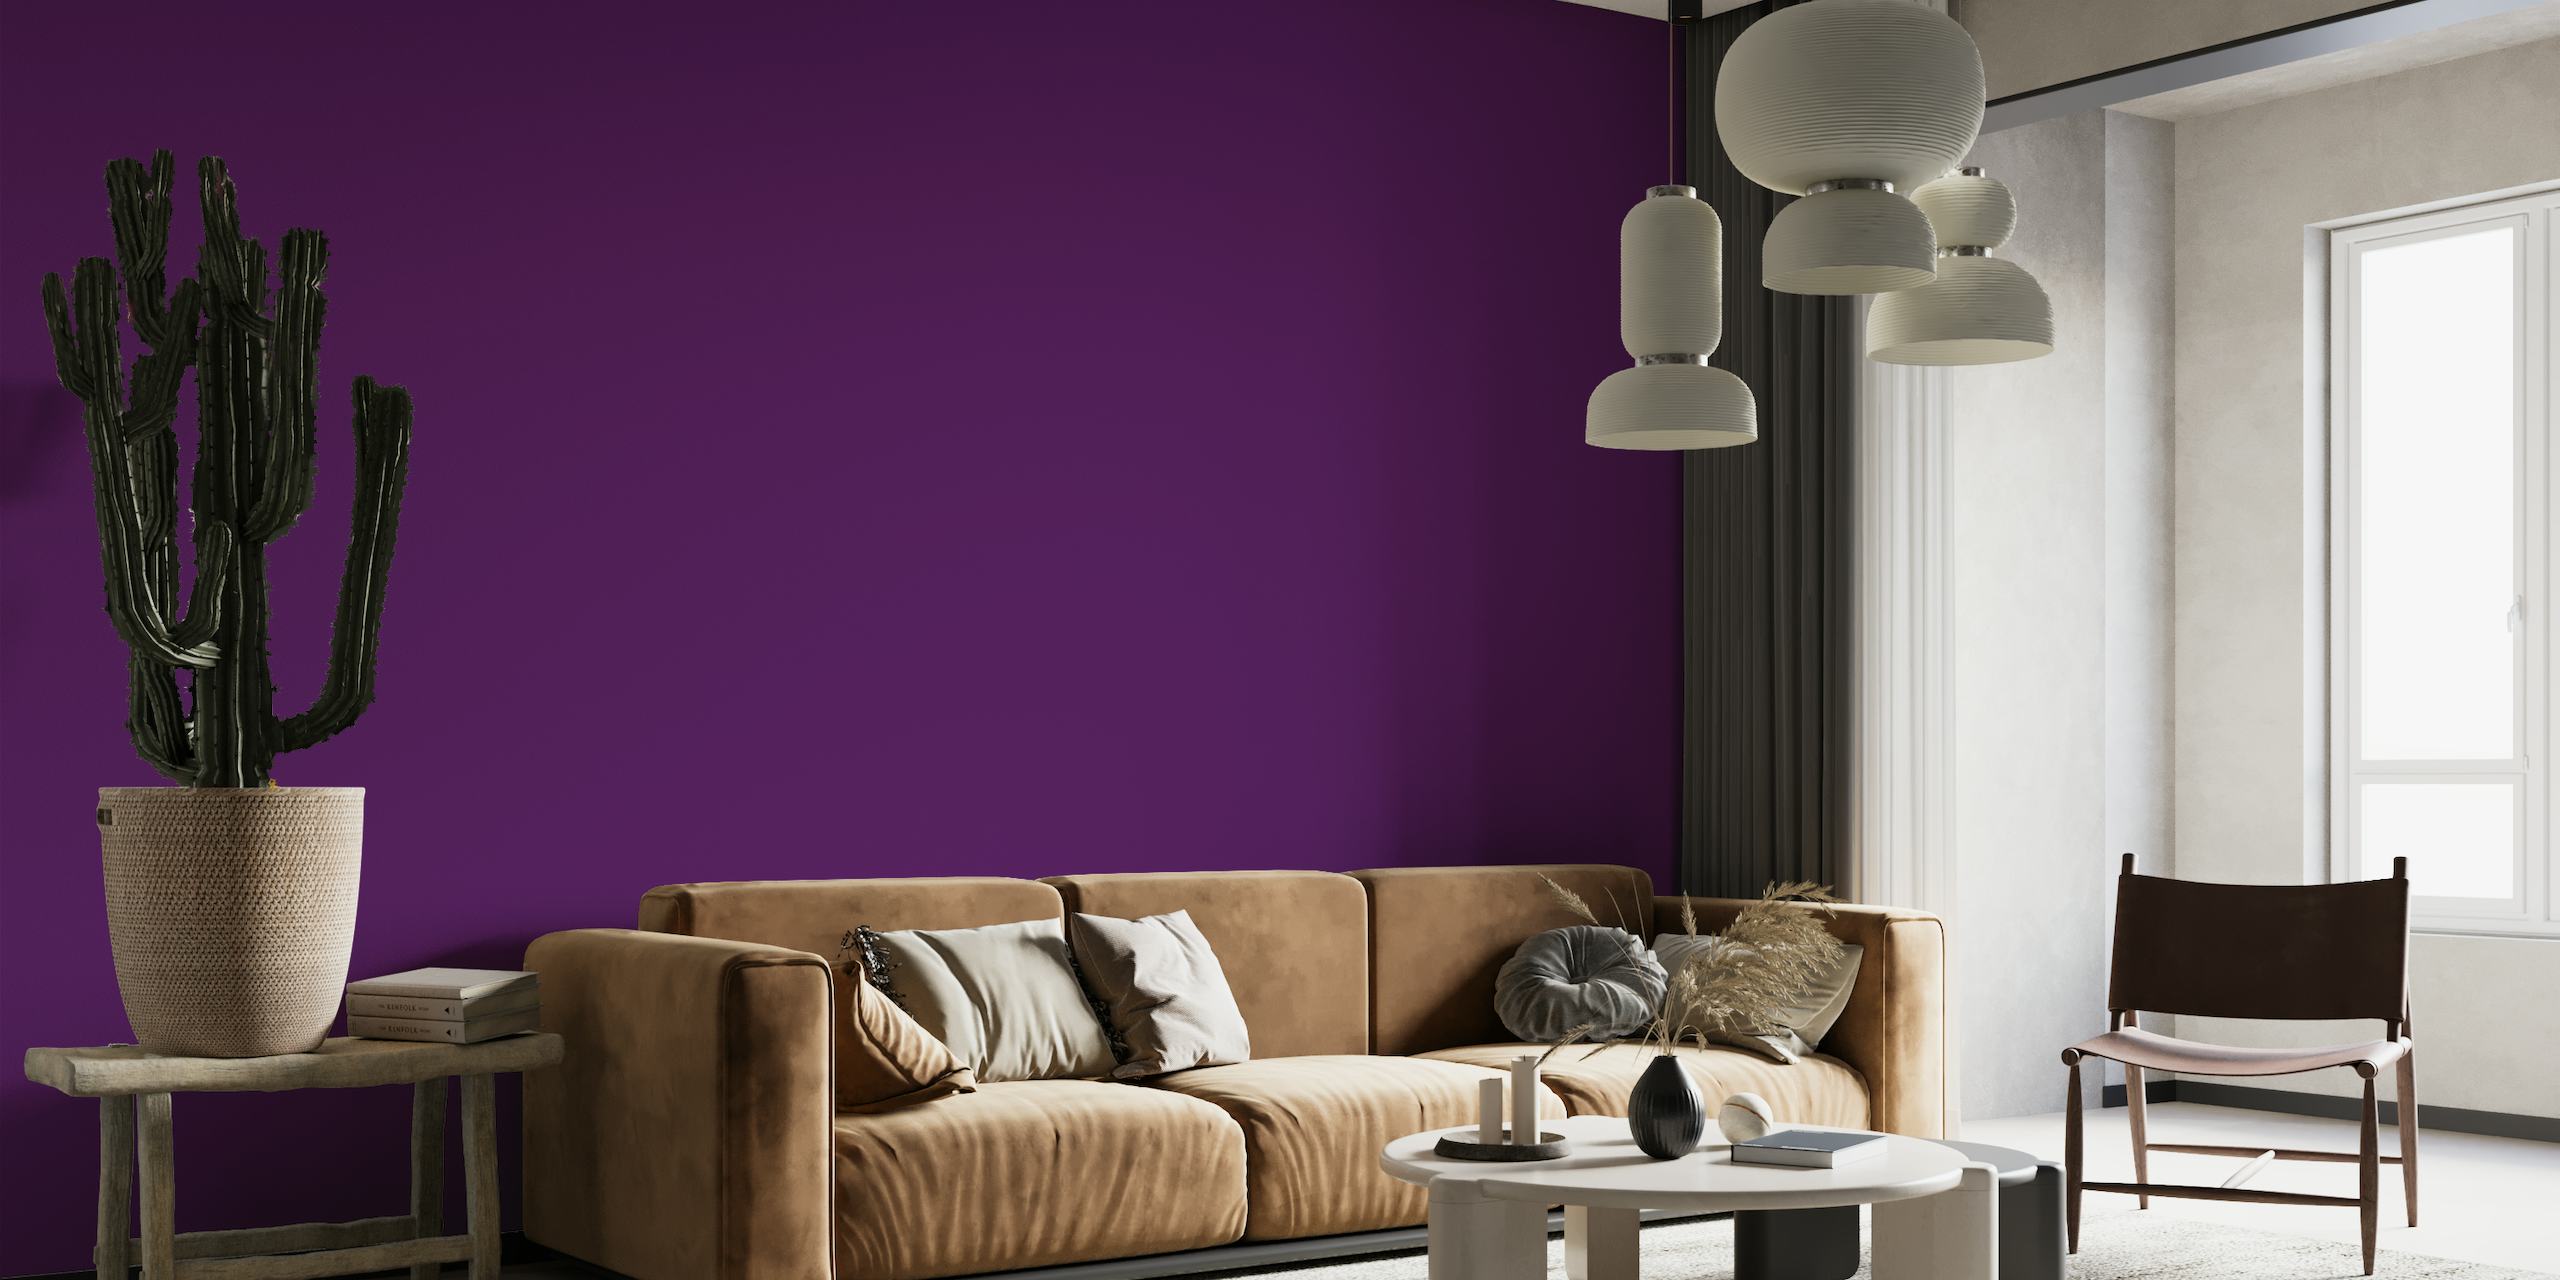 Royal Purple wall mural with luxurious and vibrant hues